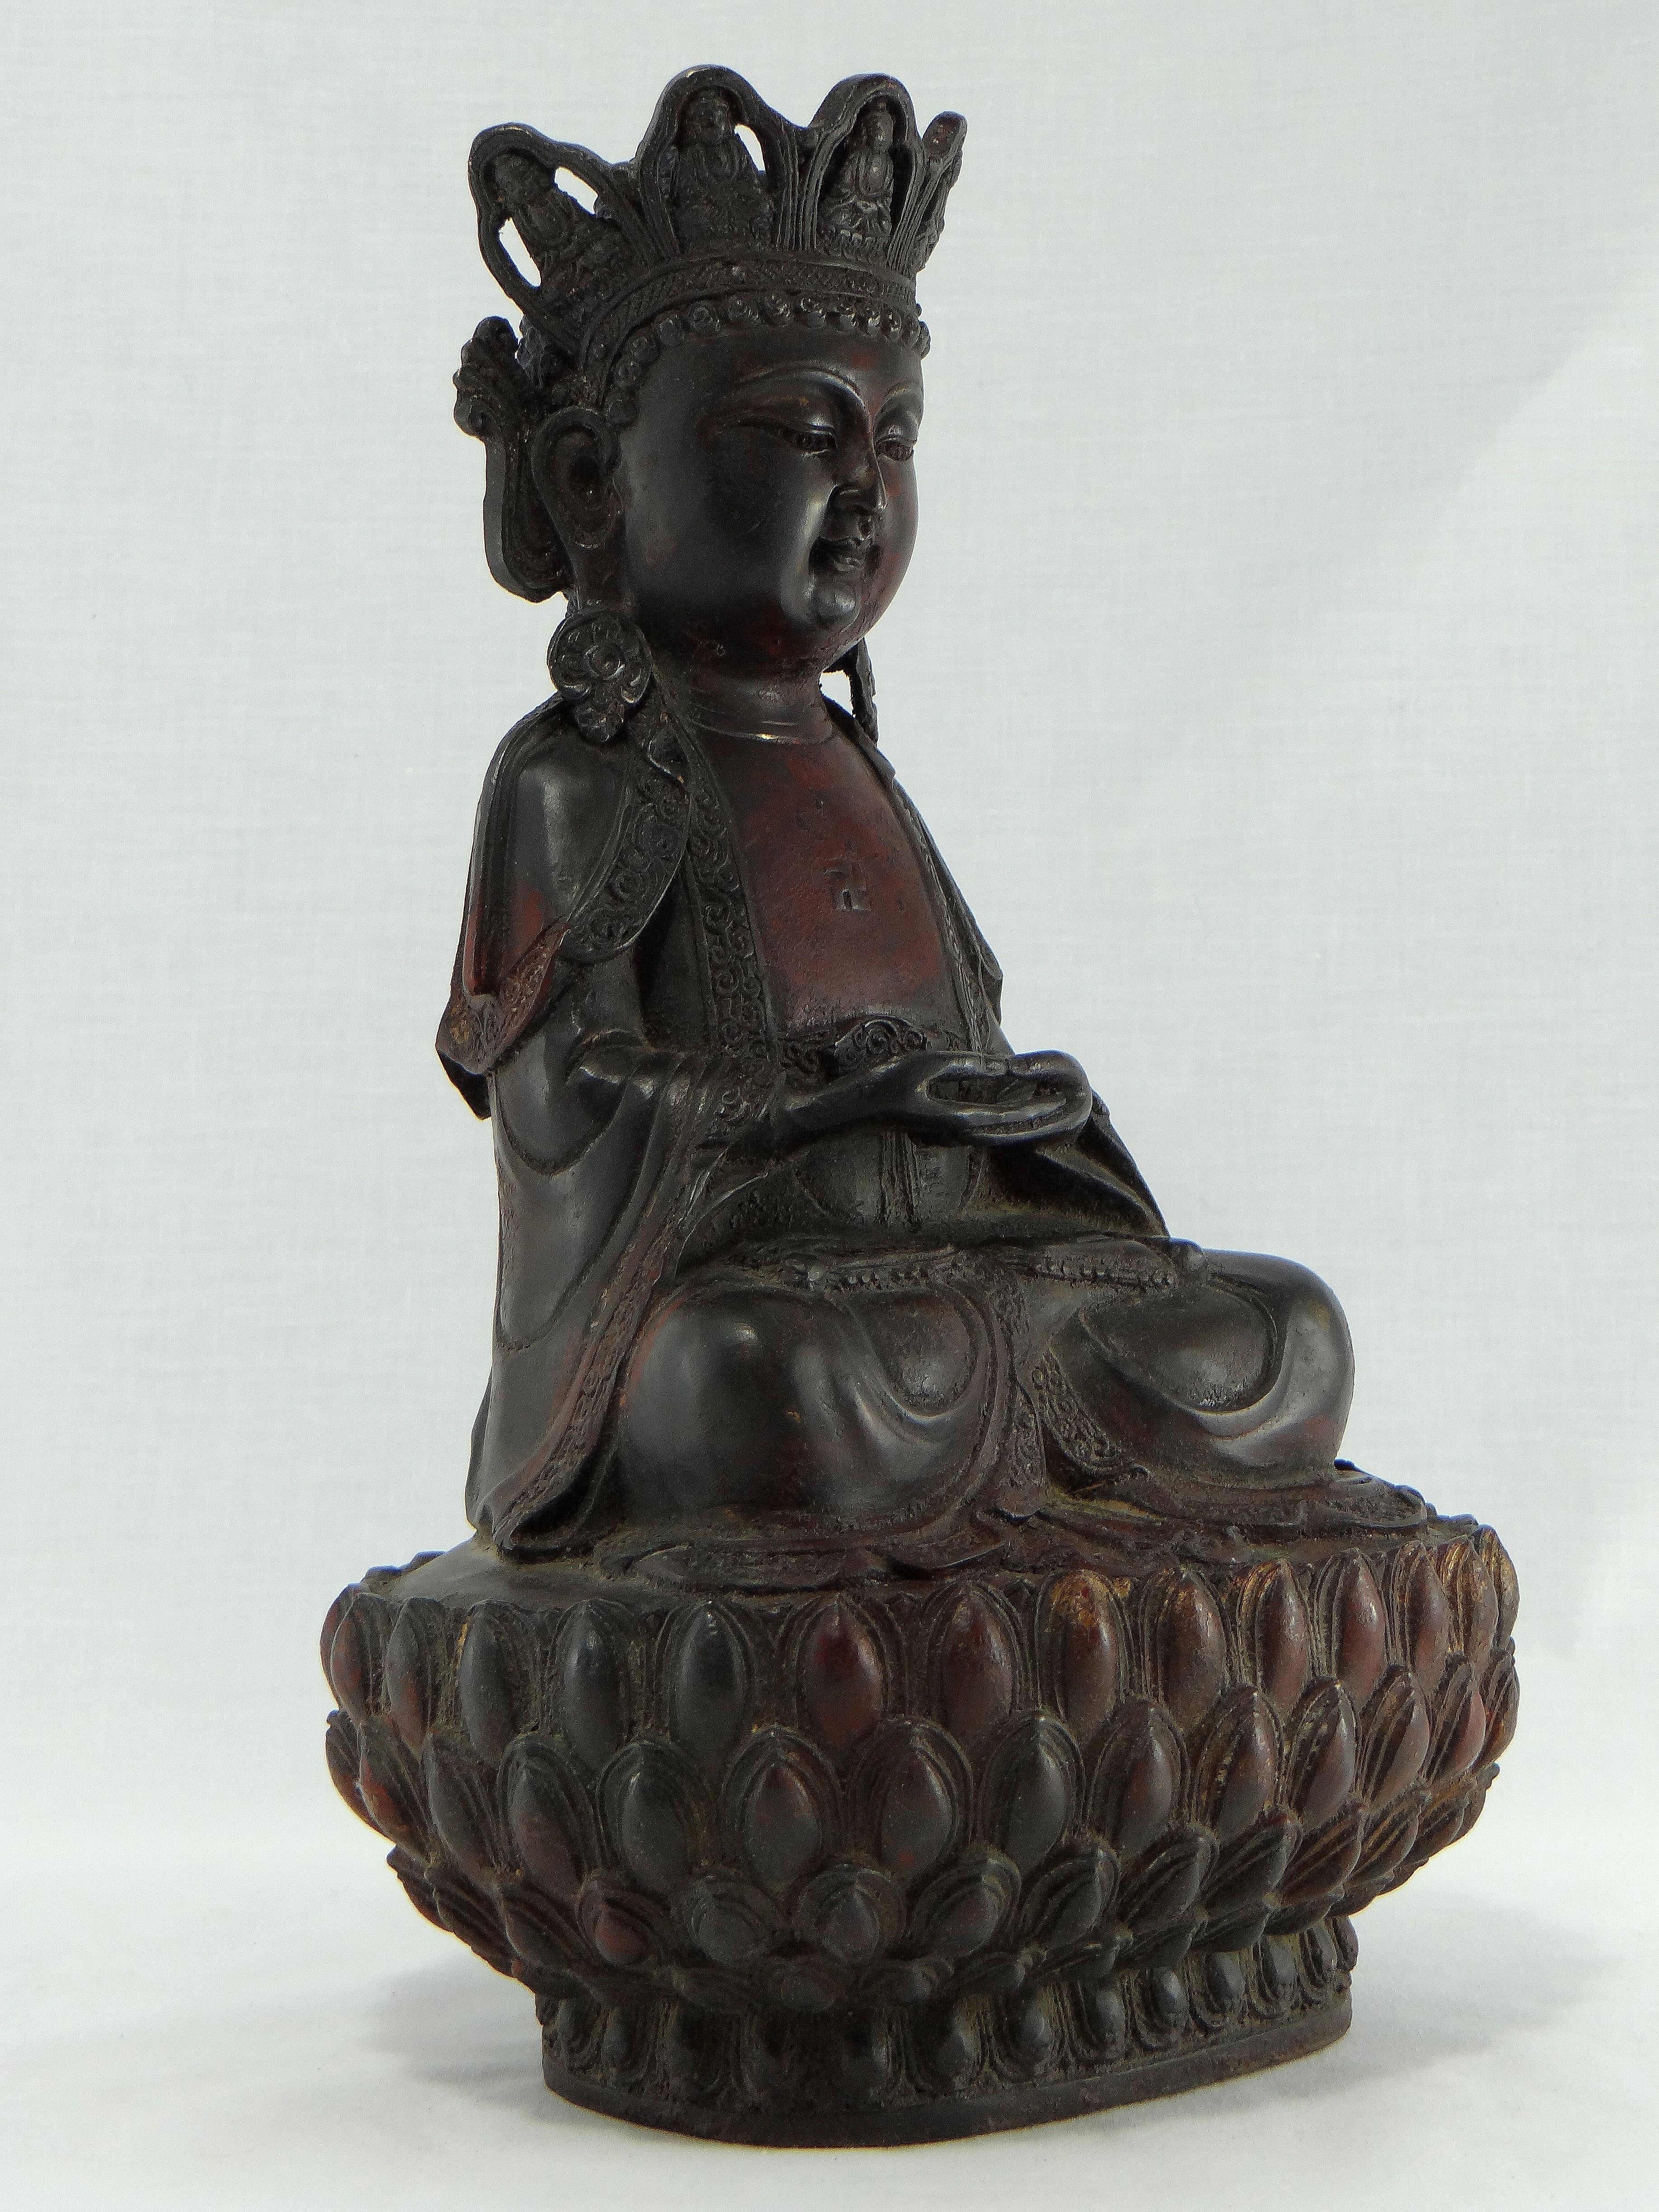 South China, 18th century in the style of Ming, superb bronze statuette formerly lacquered red representing a bodhisattva sitting in meditation on a lotus, hands joined, wearing a tiara decorated with reminiscence of the Buddha, a swastika on the